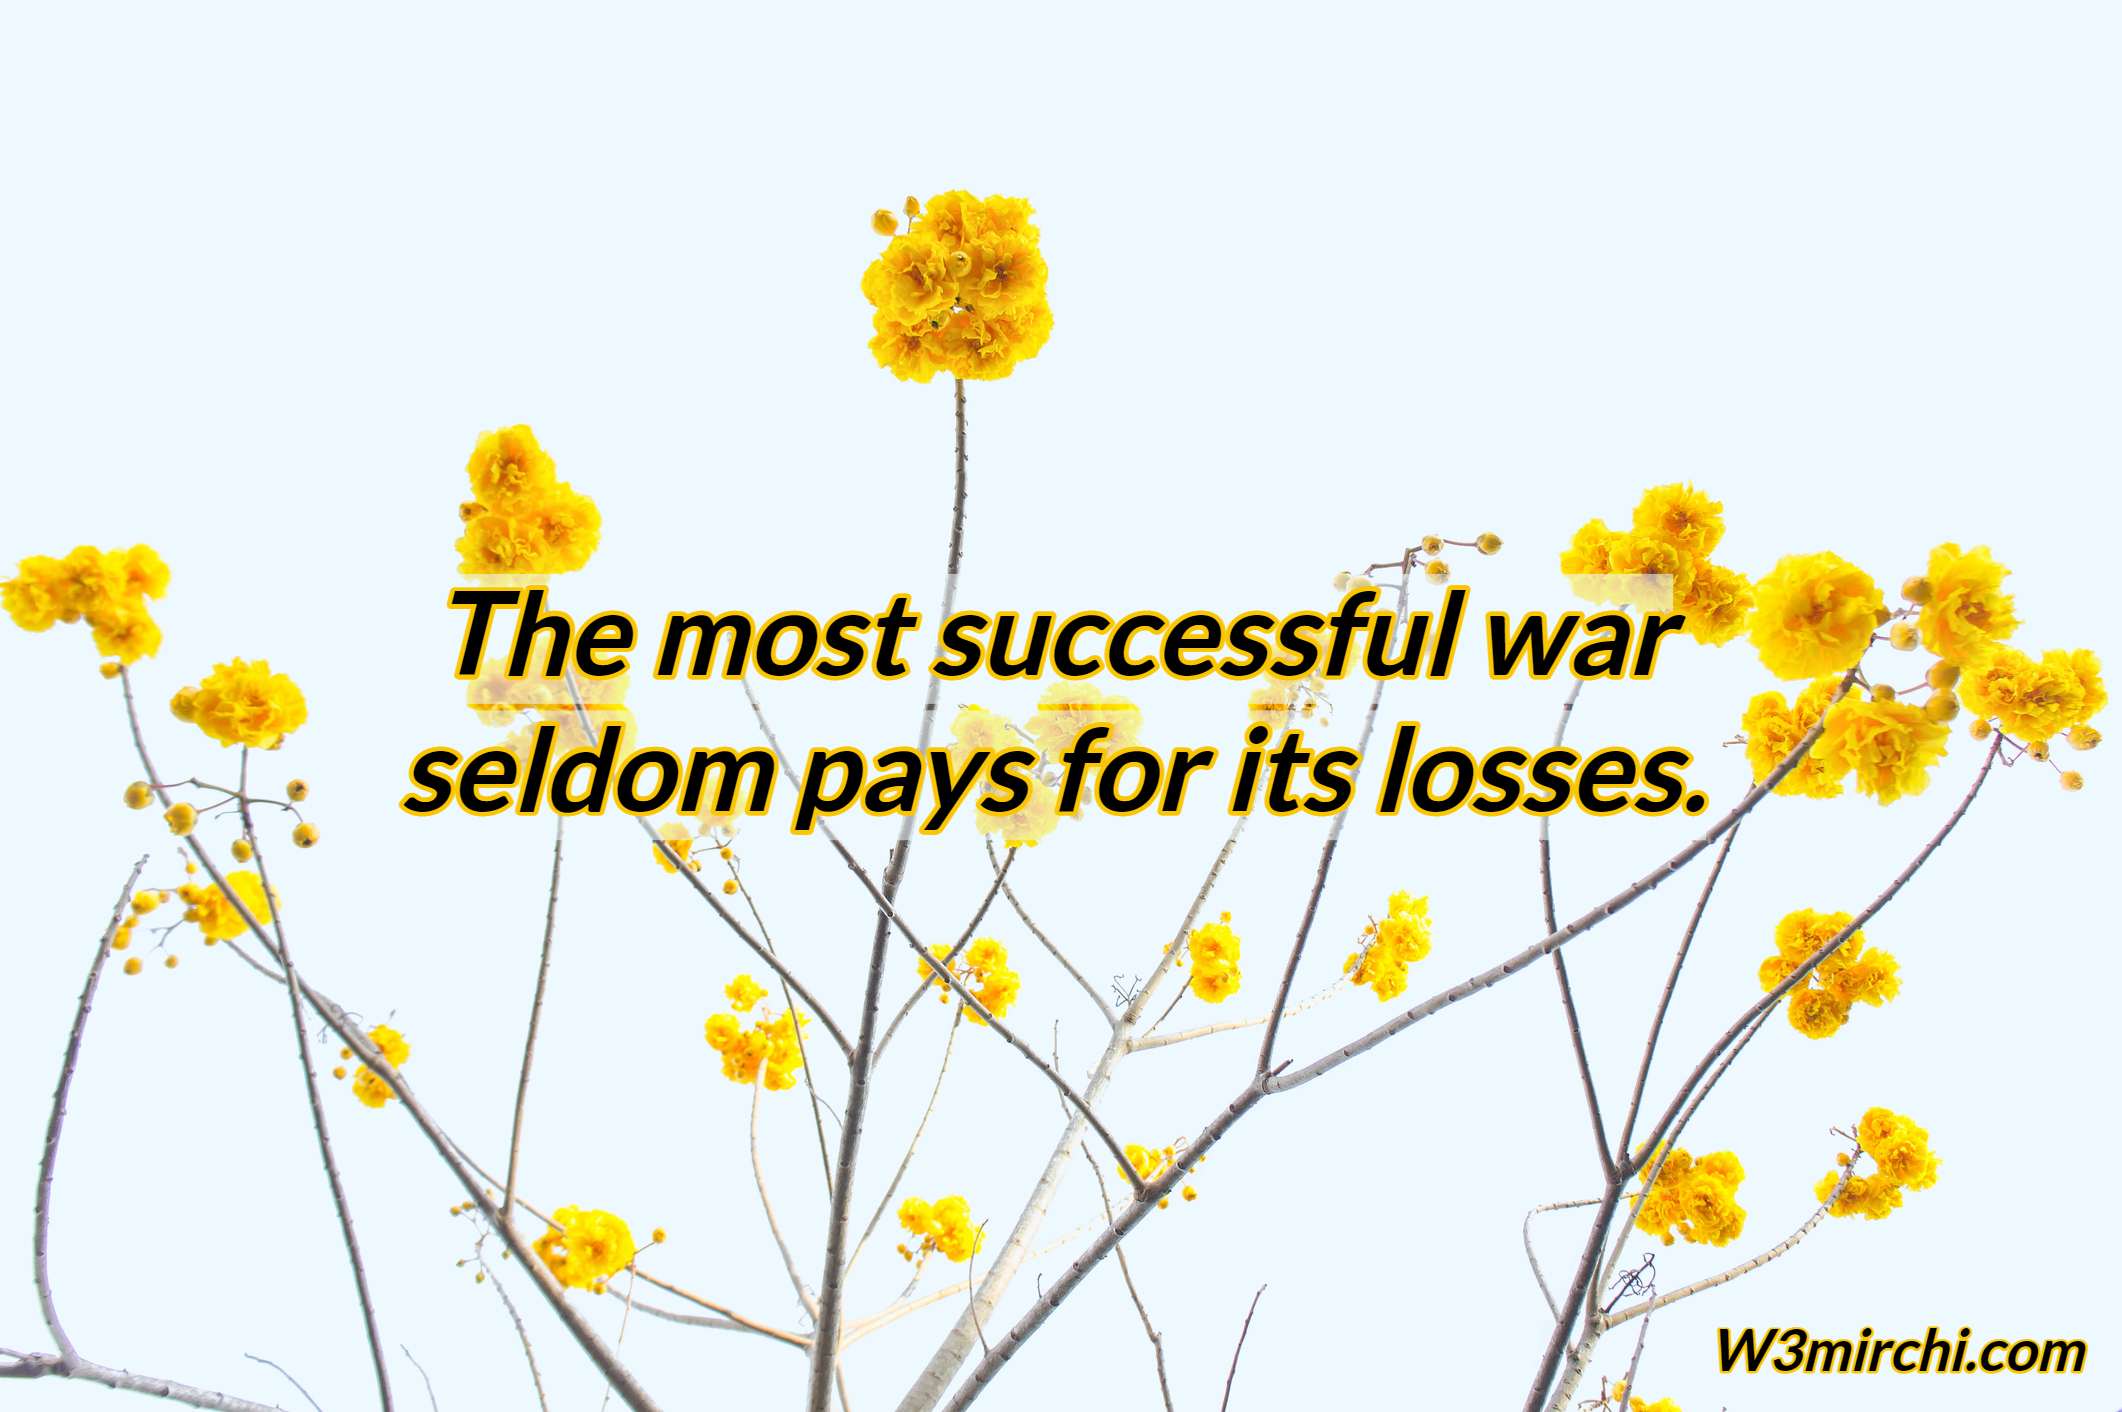 The most successful war